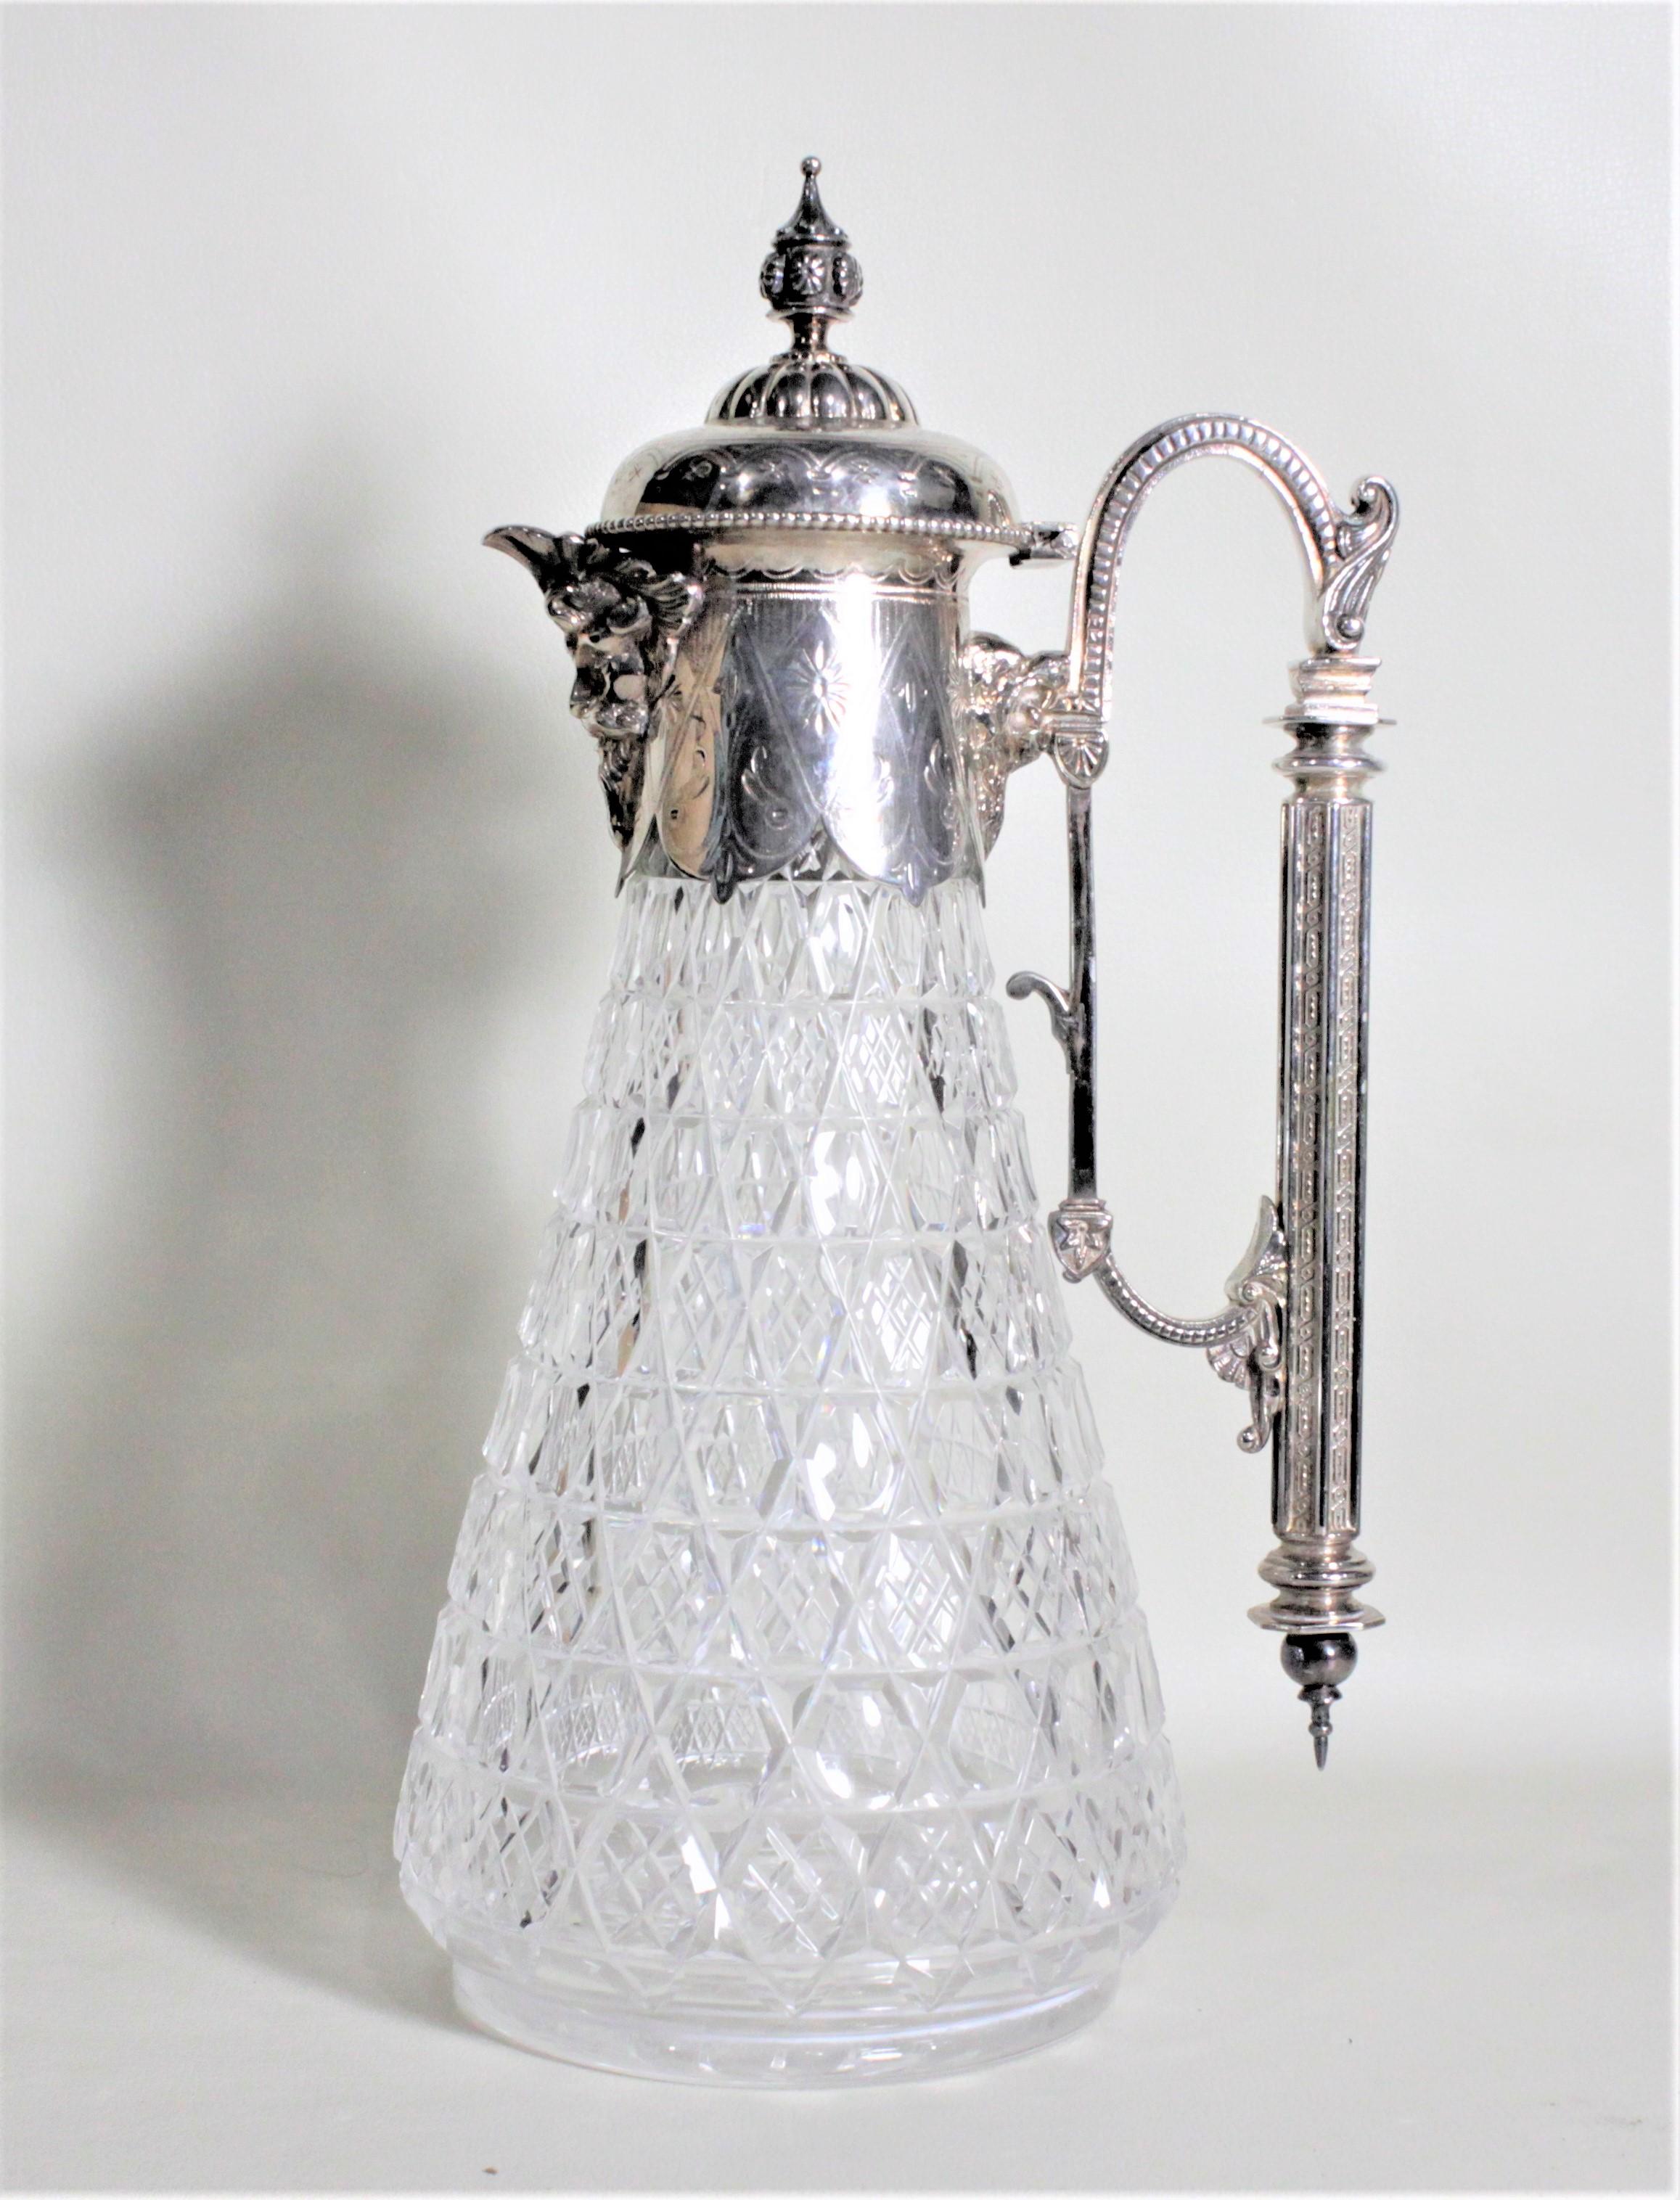 This antique silver plate and cut crystal claret jug was most likely made in England in circa 1900 in the Victorian style. The jug features a large silver plated handle and nice raised decoration around the banding at the top which accents the cut